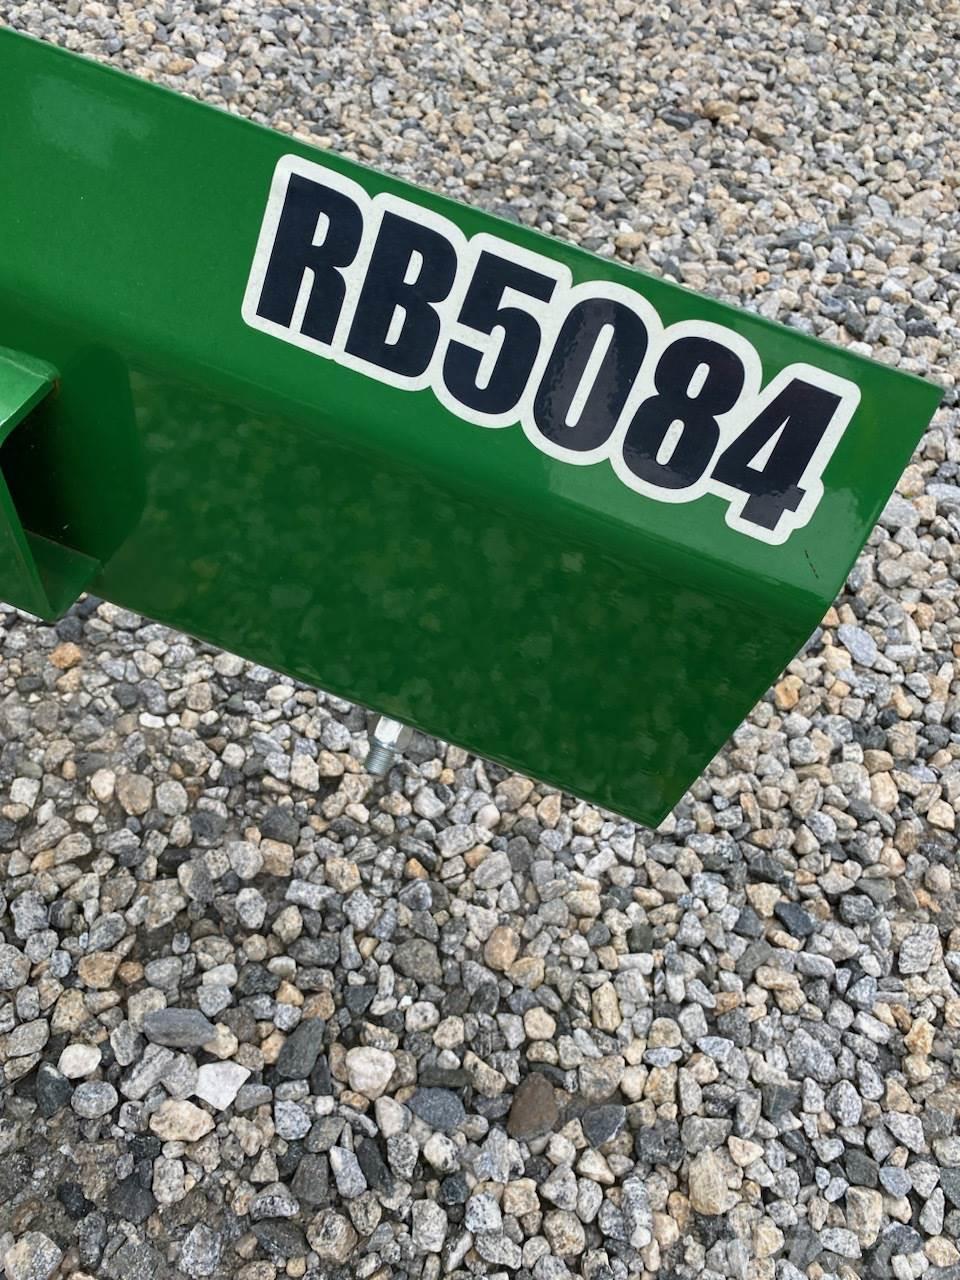 John Deere RB5084 Snow blades and plows